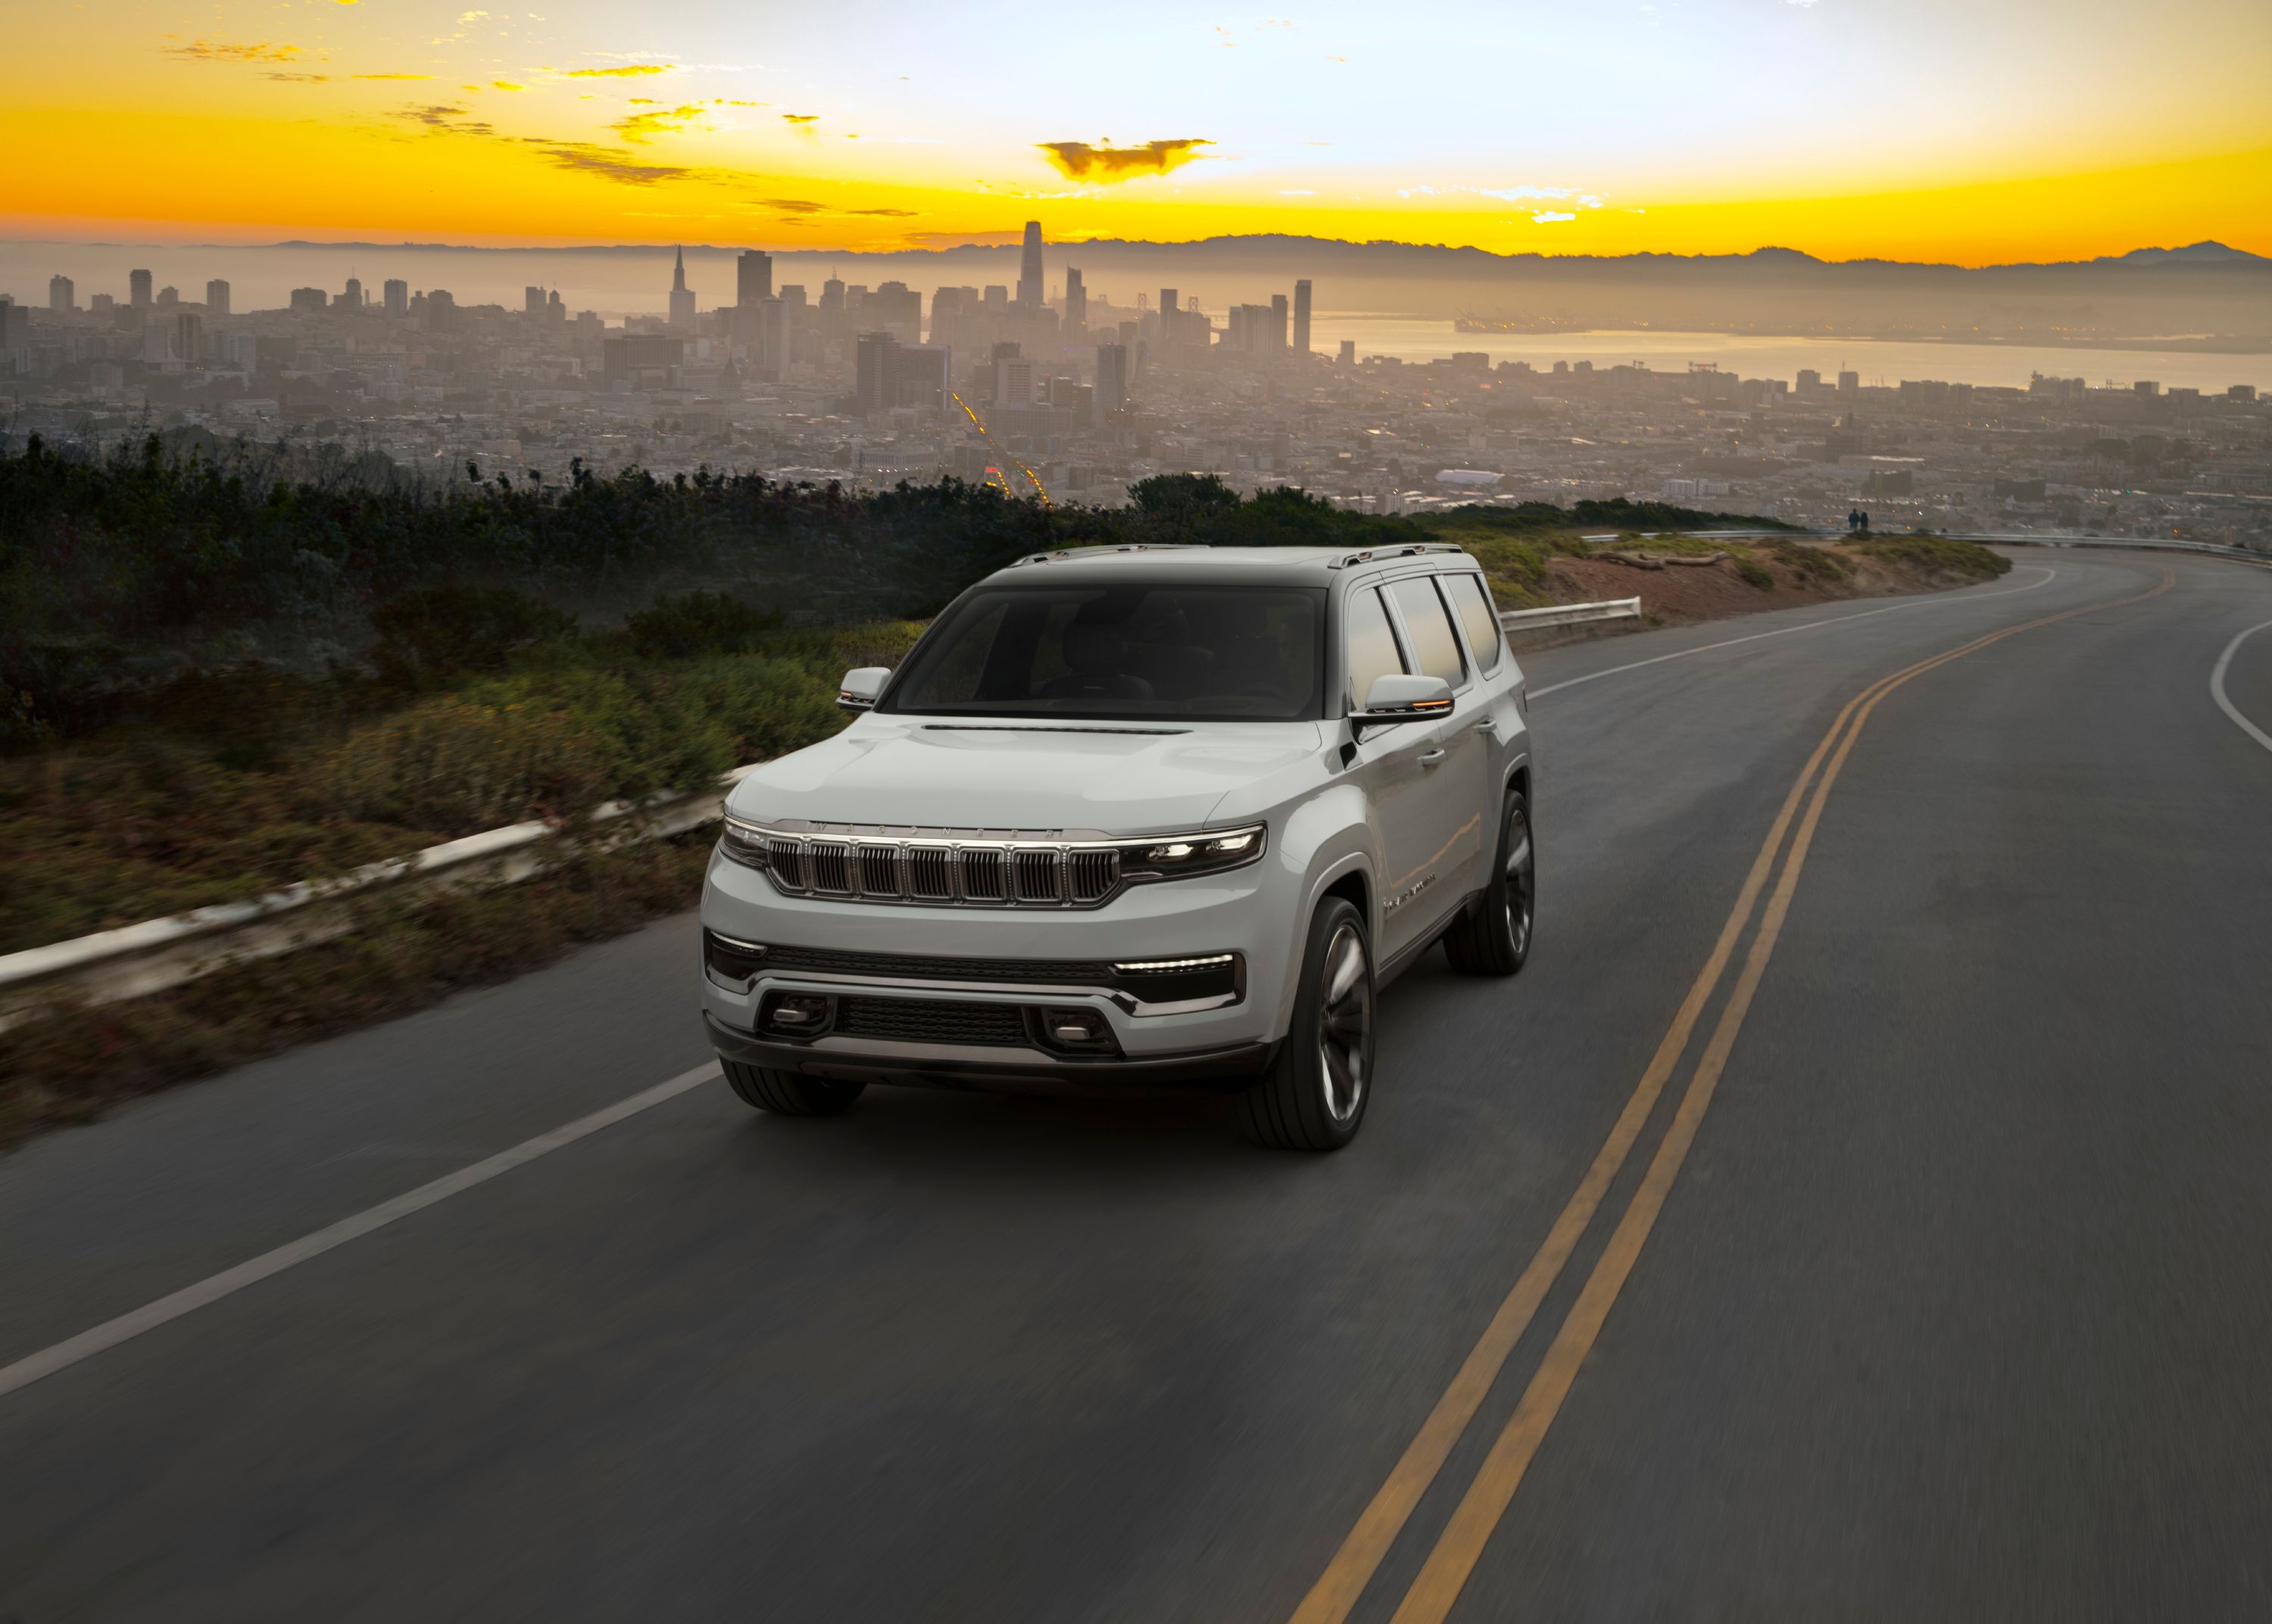 2021 Jeep Unveils The Grand Wagoneer Concept With Bold Exterior and a Technology-Rich Cabin 